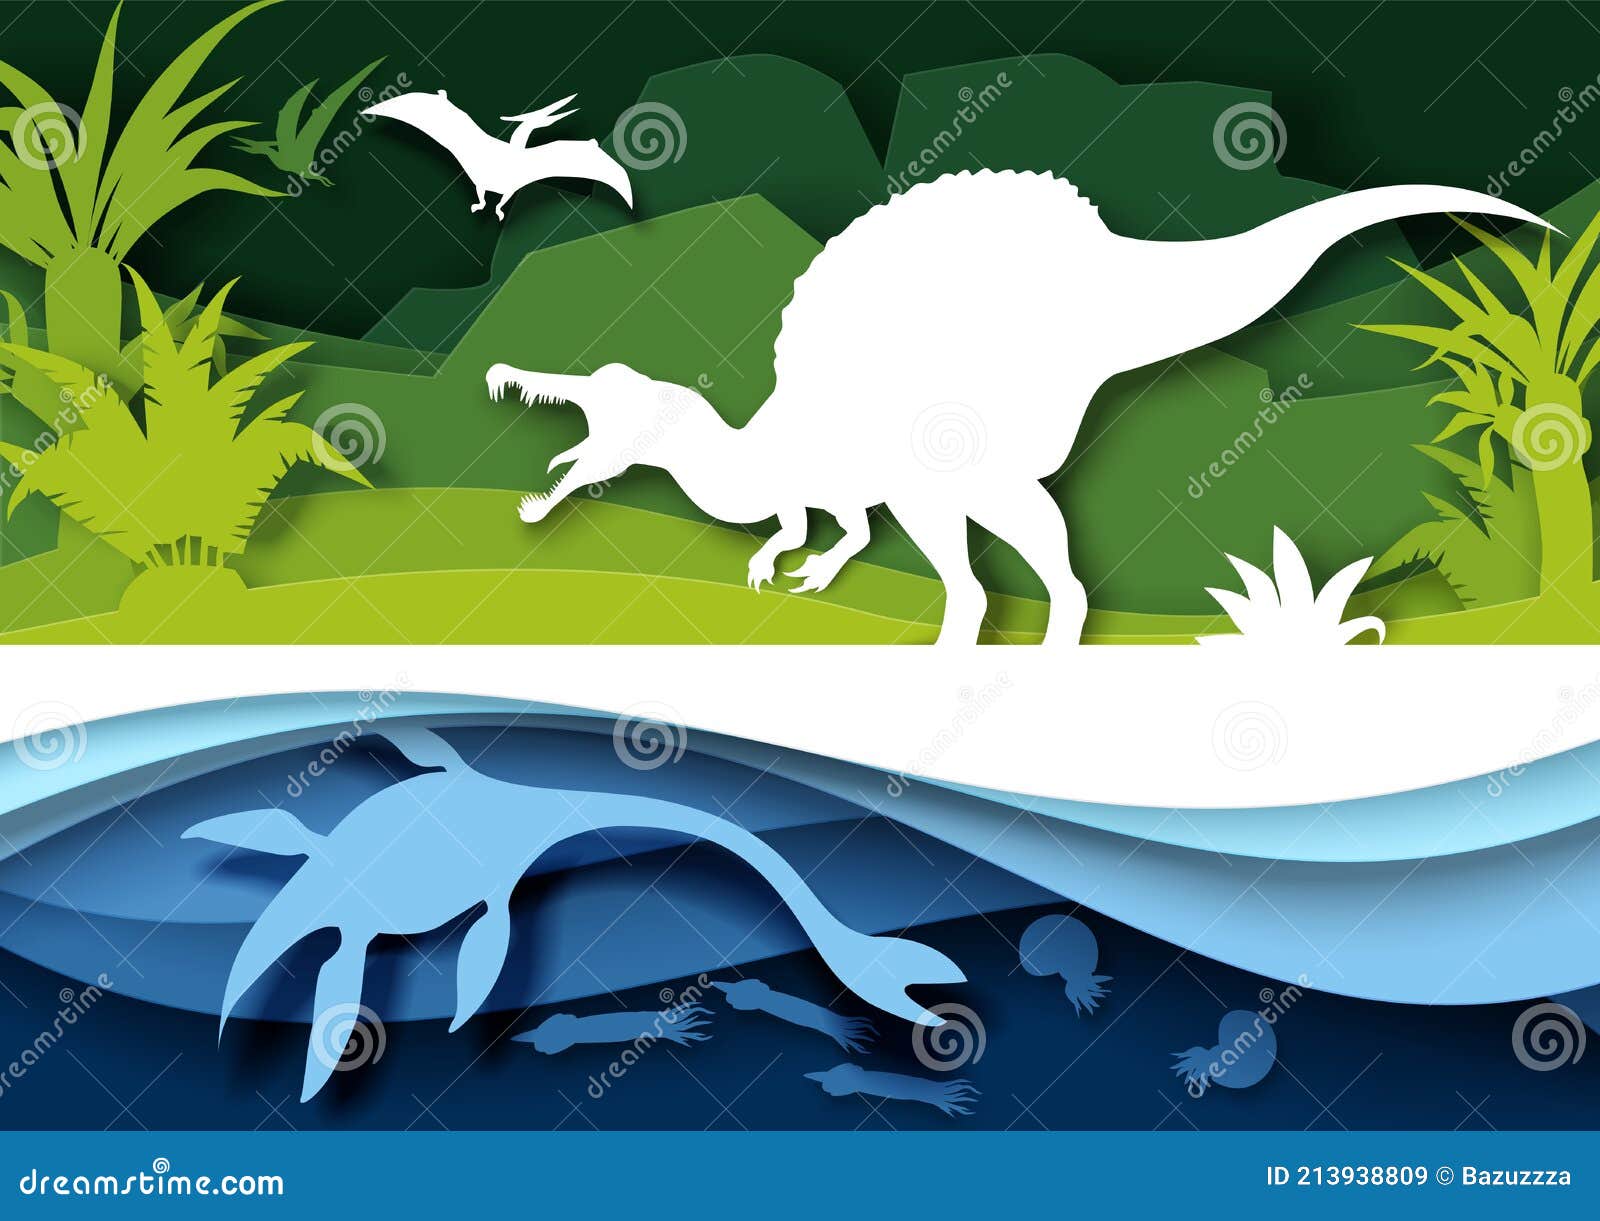 paper cut dino silhouettes and nature landscape,  . dinosaur, reptile wild animal. archeology, history